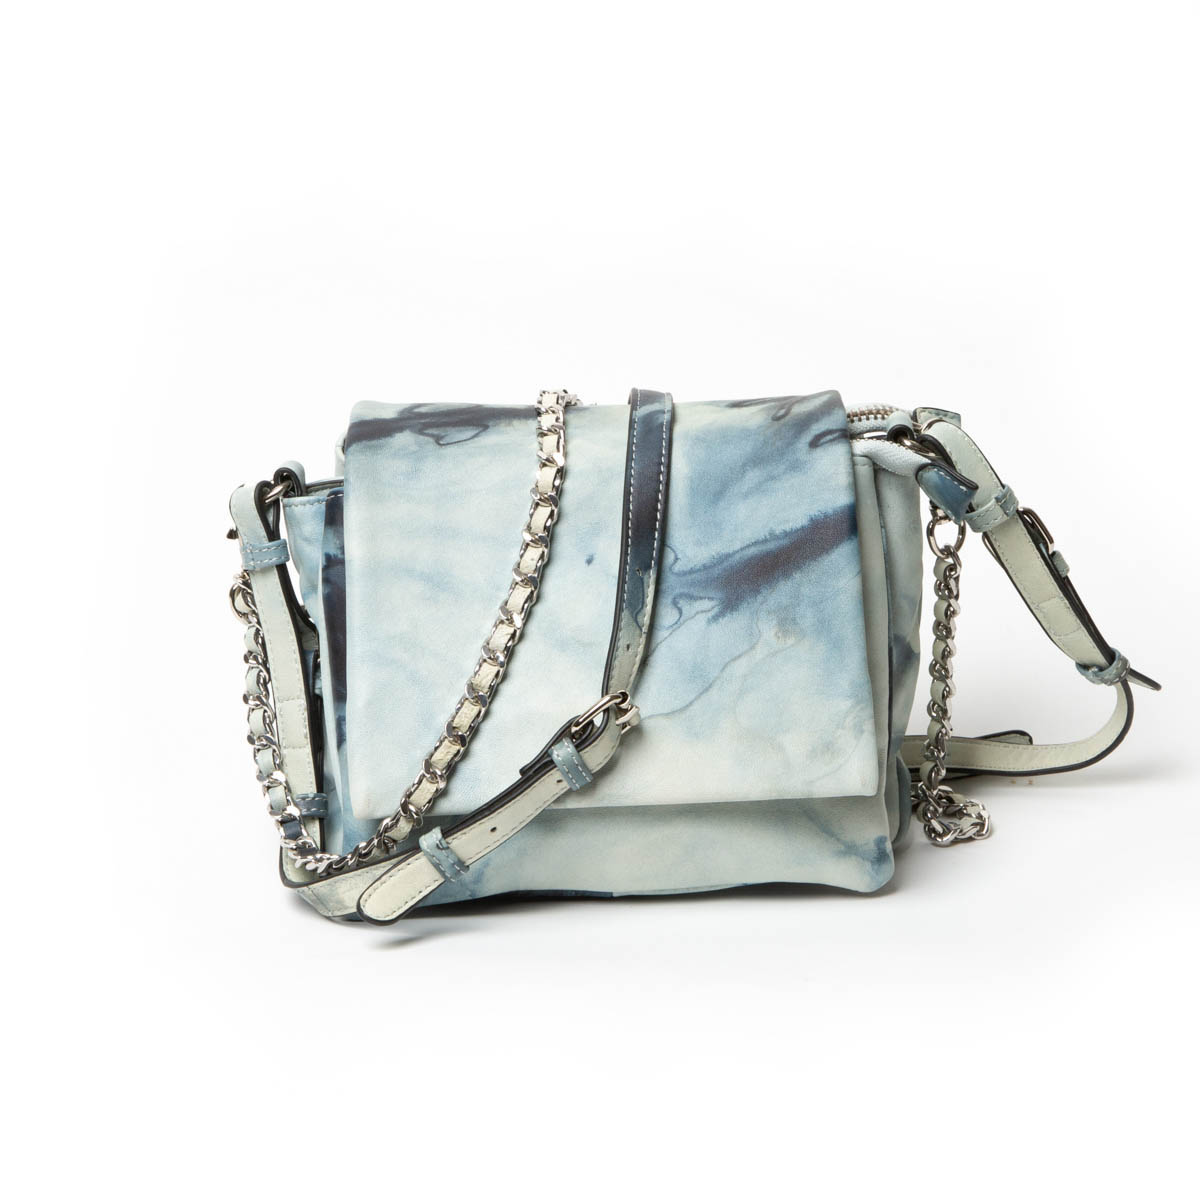 SAC ABY TIE AND DYE NOIR